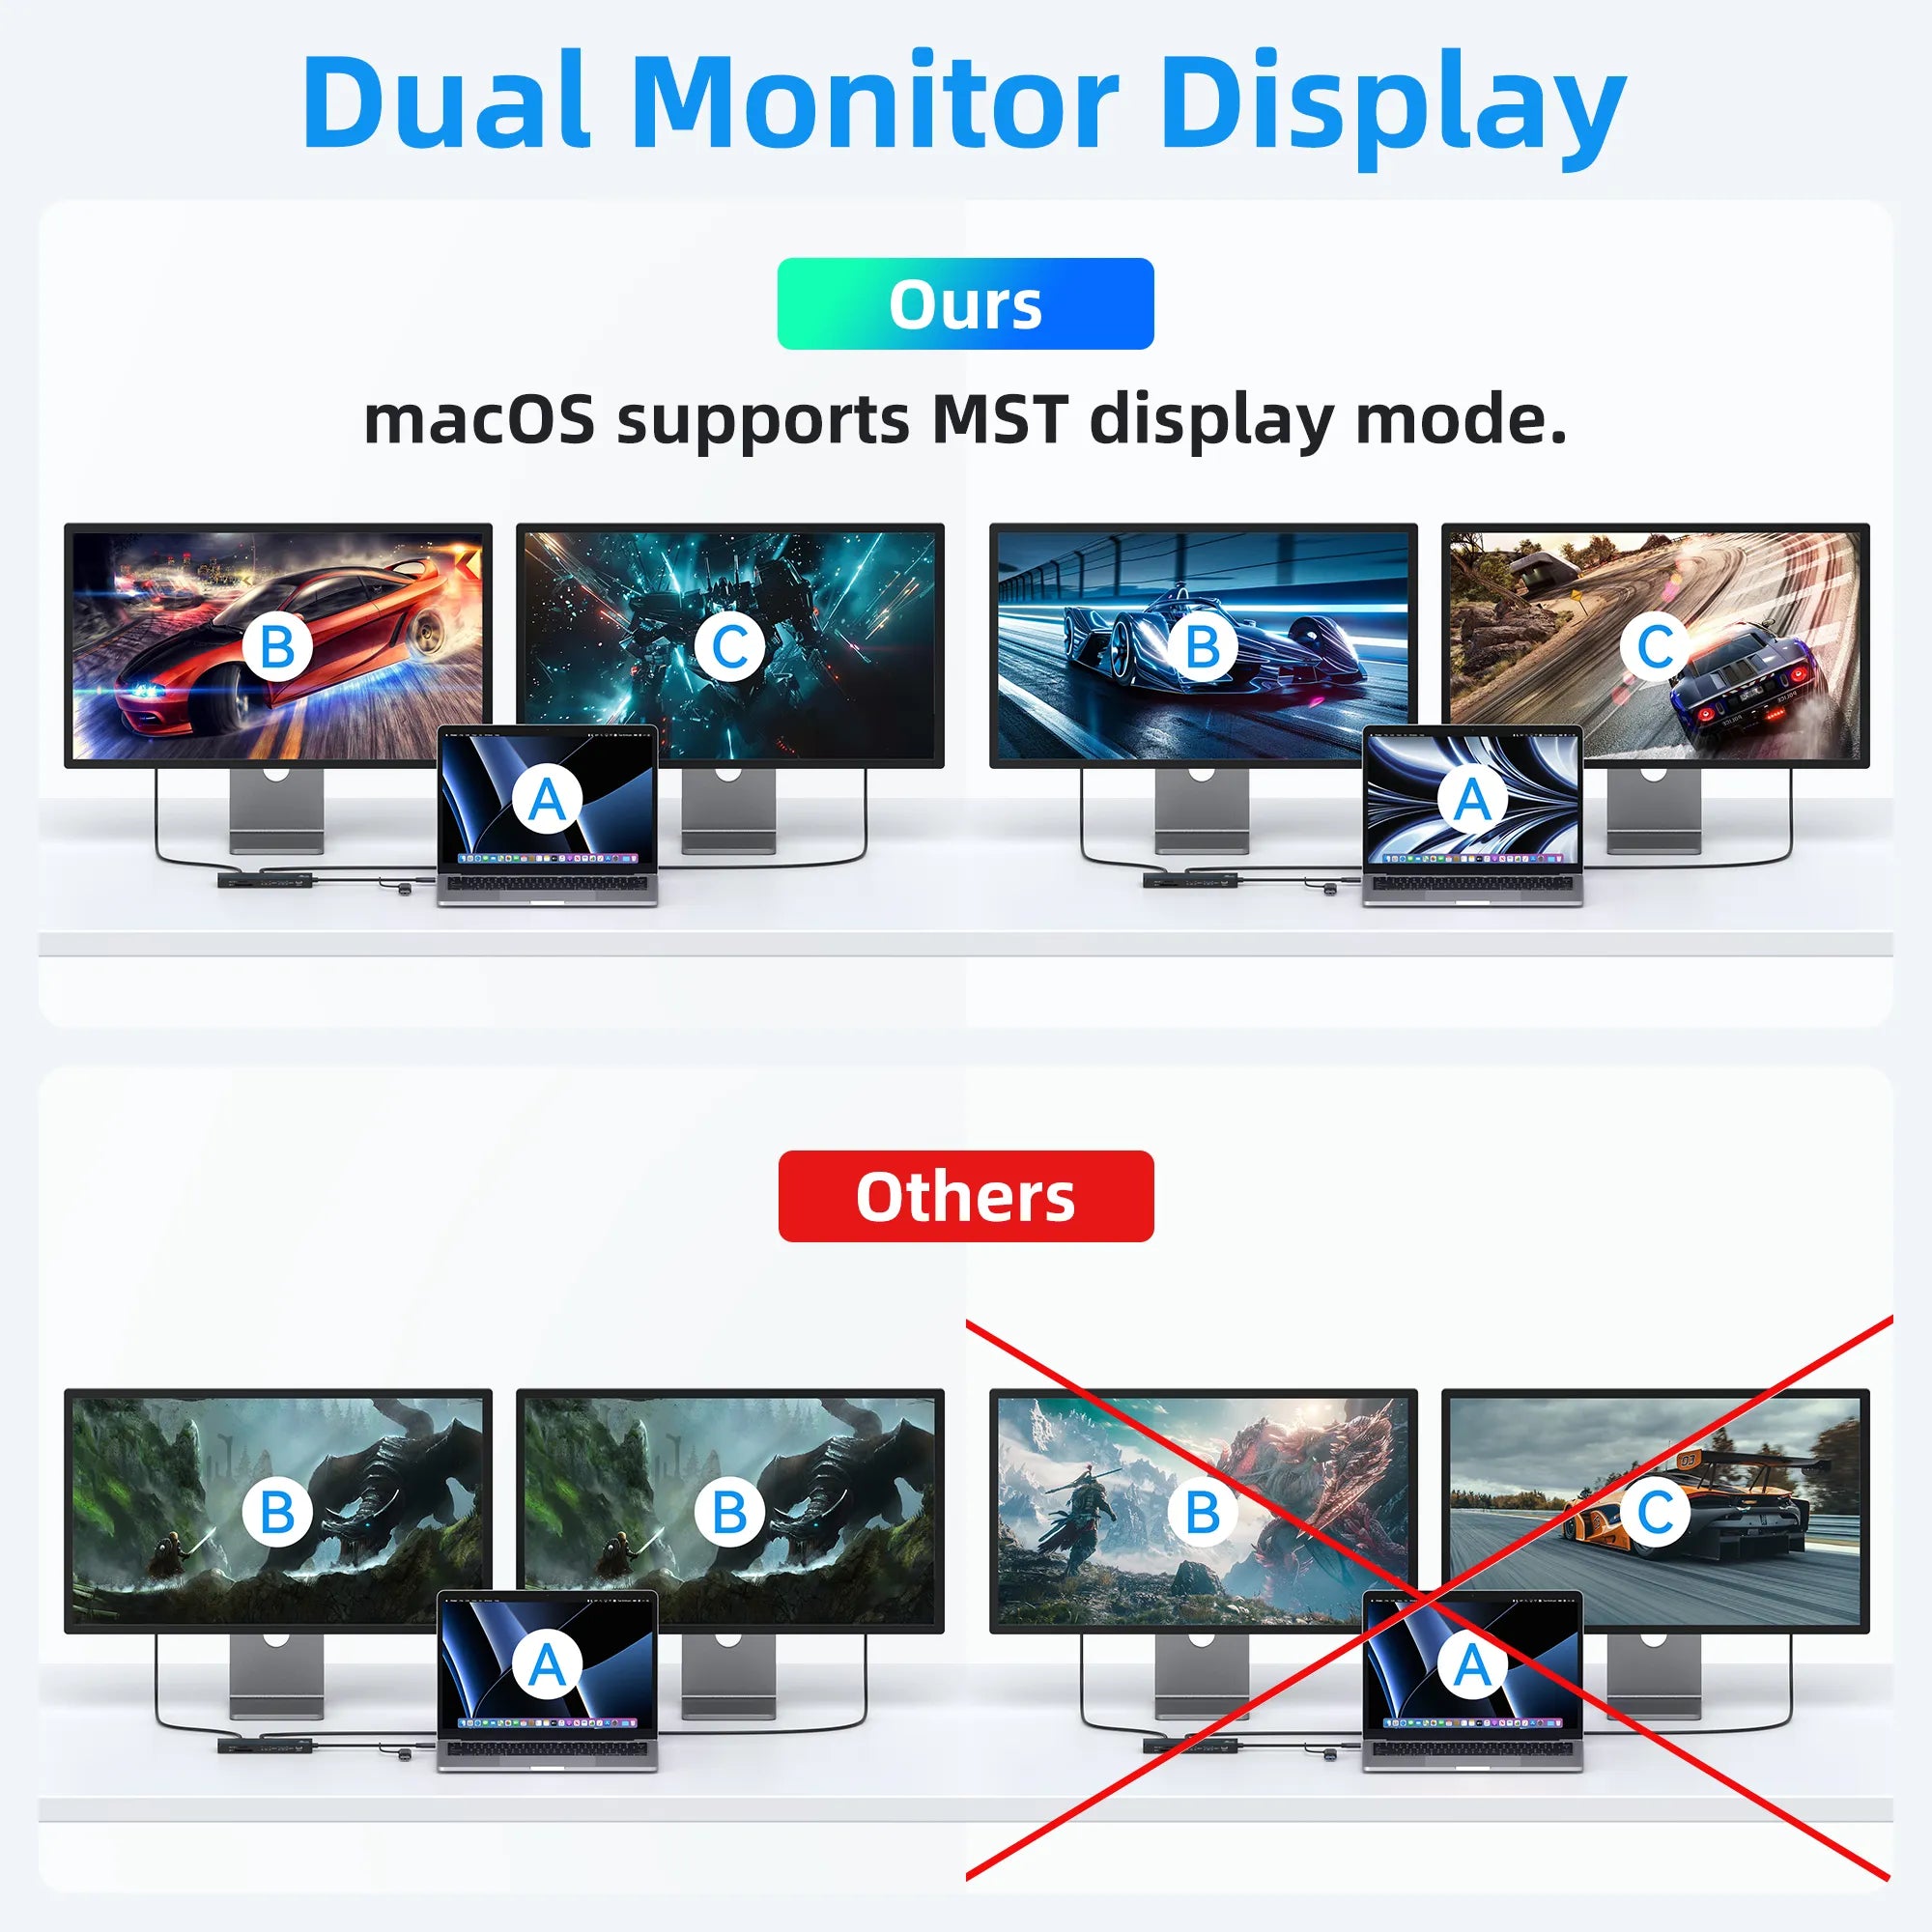 Dual Monitor Display(MacOS support MST display mode)